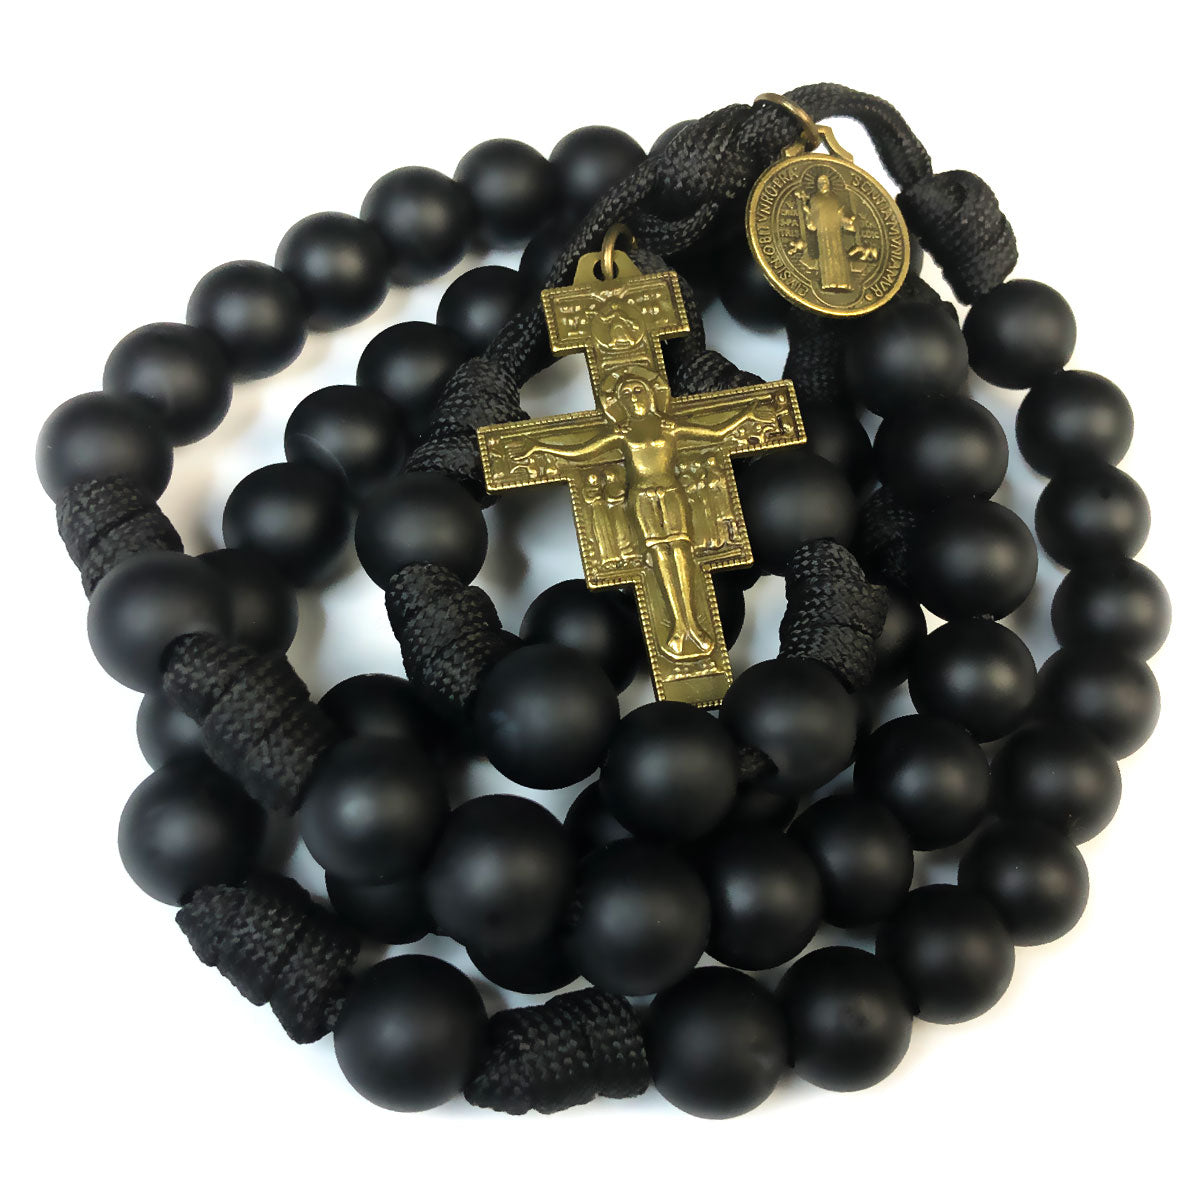 Extel Saint Peter Chanel Catholic Rosary Beads for Men, Made in USA Metal  Type: Silver Plate, Catholic Sacramental/Devotion: St. Peter Chanel, Color:  Black Onyx 